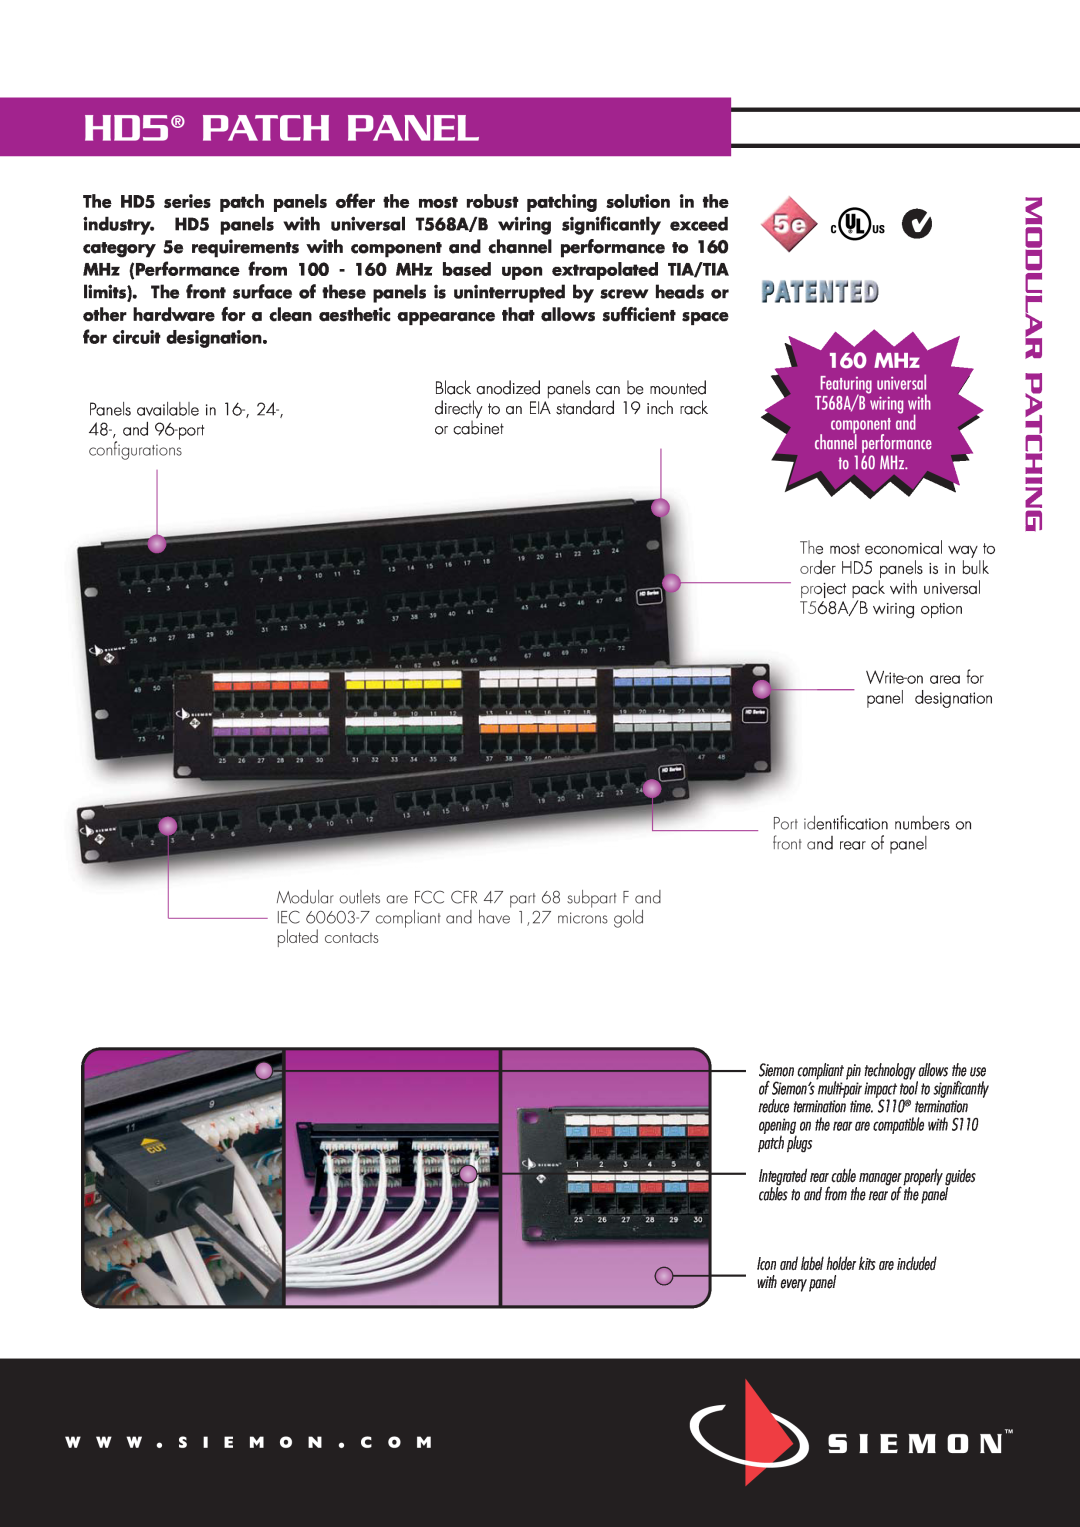 The Siemon Company manual Modular Patching, HD5 PATCH PANEL, MHz Featuring universal T568A/B wiring with component and 